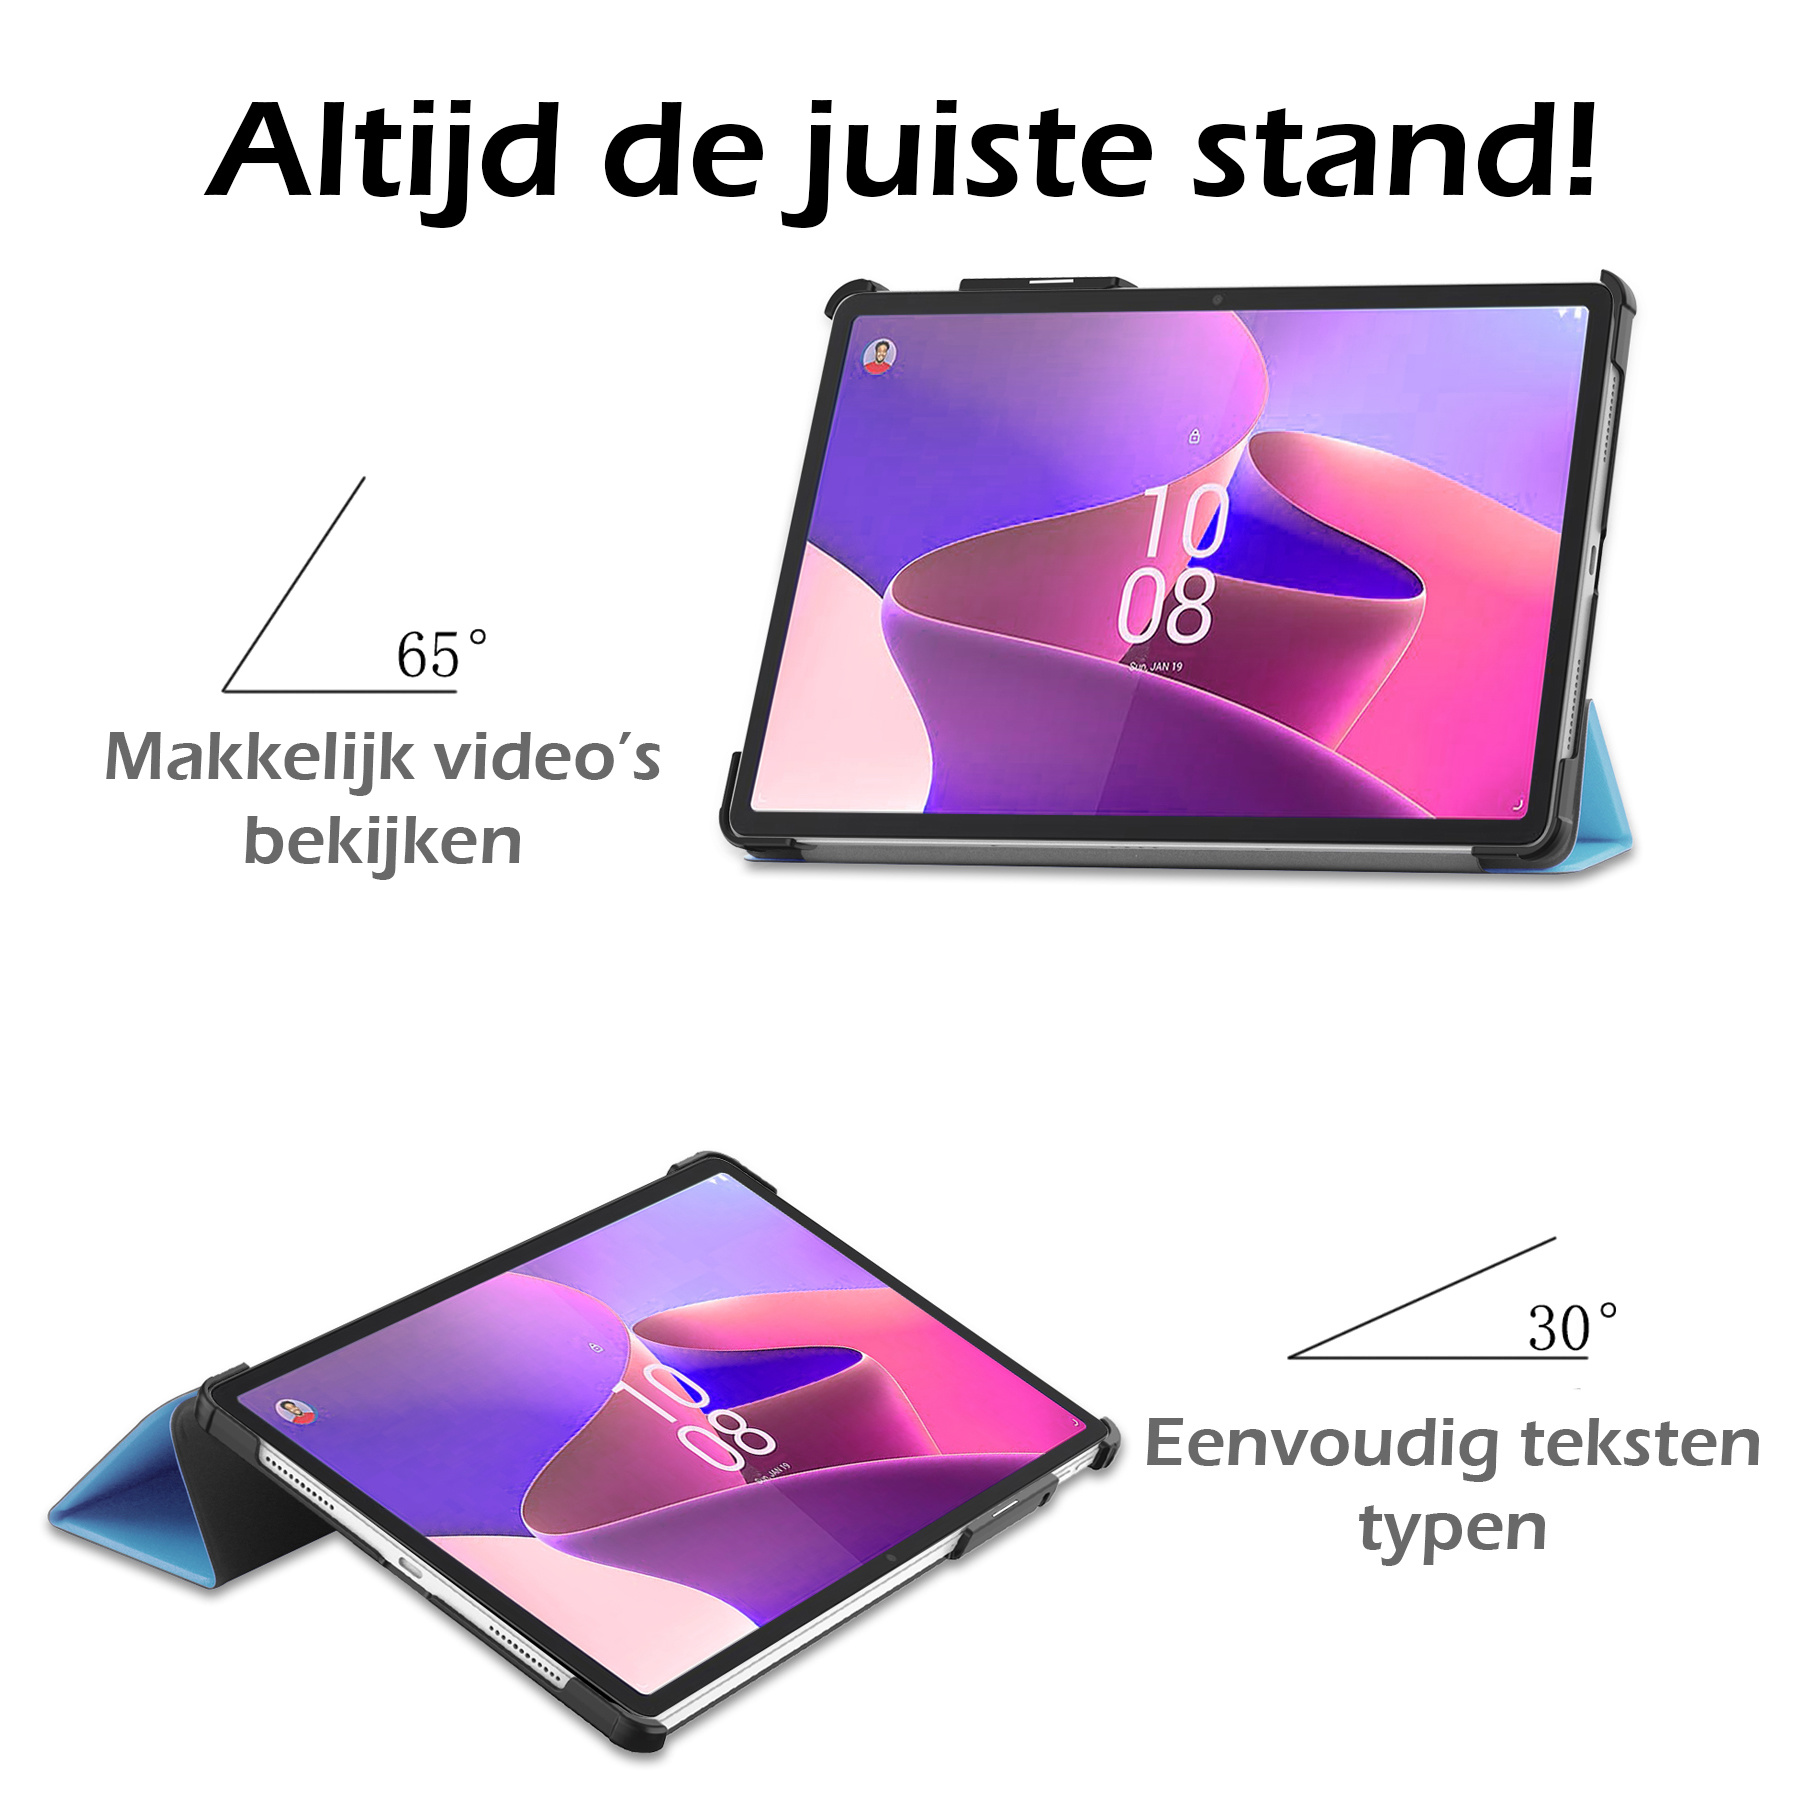 Nomfy Hoes Geschikt voor Lenovo Tab P11 Pro Hoes Tri-fold Tablet Hoesje Case Met Uitsparing Geschikt voor Lenovo Pen - Hoesje Geschikt voor Lenovo Tab P11 Pro Hoesje Hardcover Bookcase - Lichtblauw